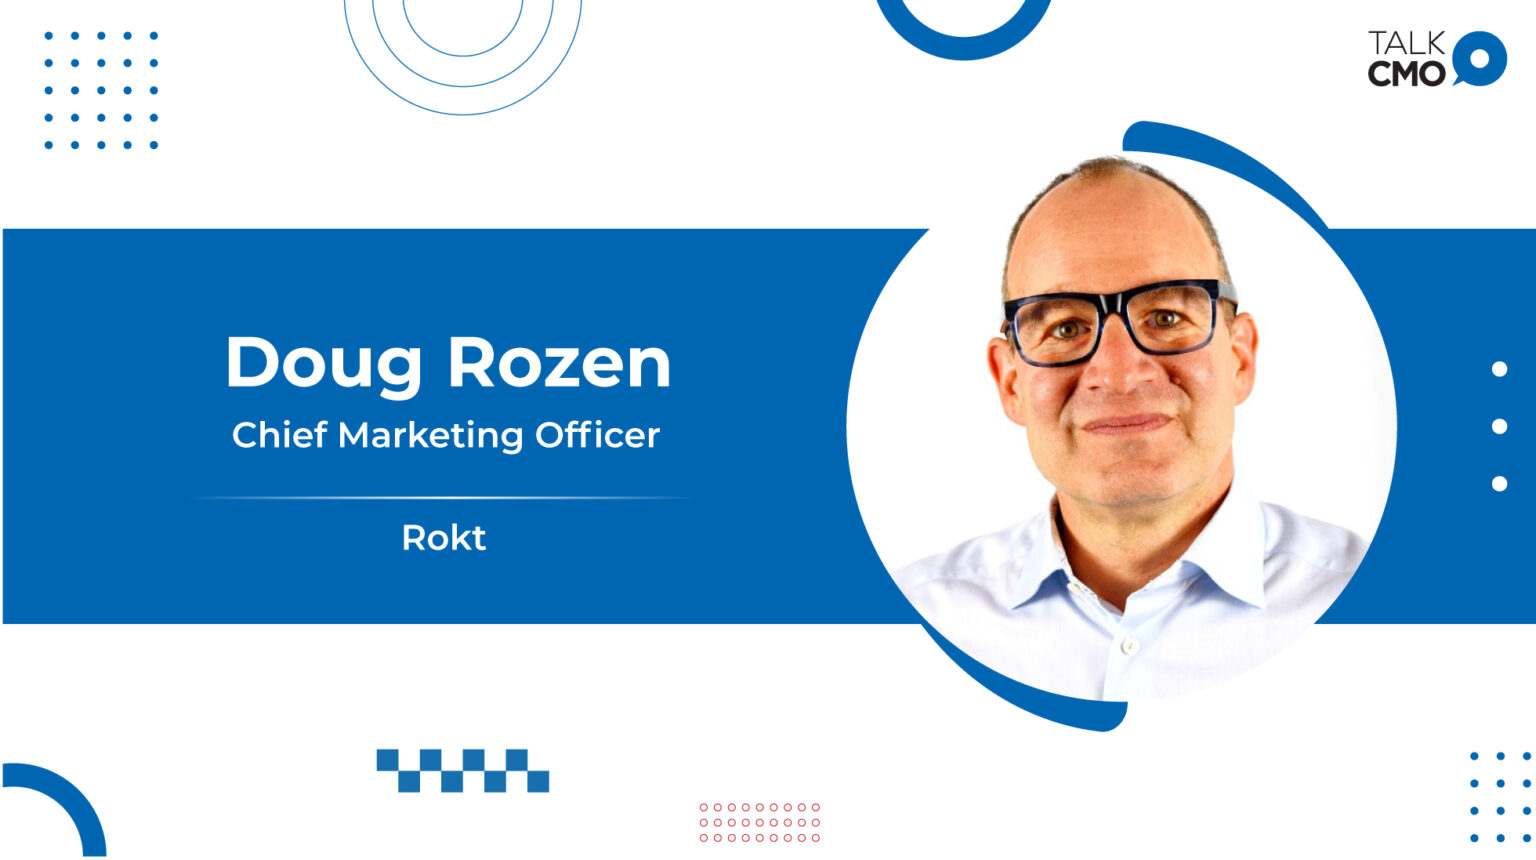 Rokt Welcomes Doug Rozen as Chief Marketing Officer, Propelling Company’s Continued Expansion